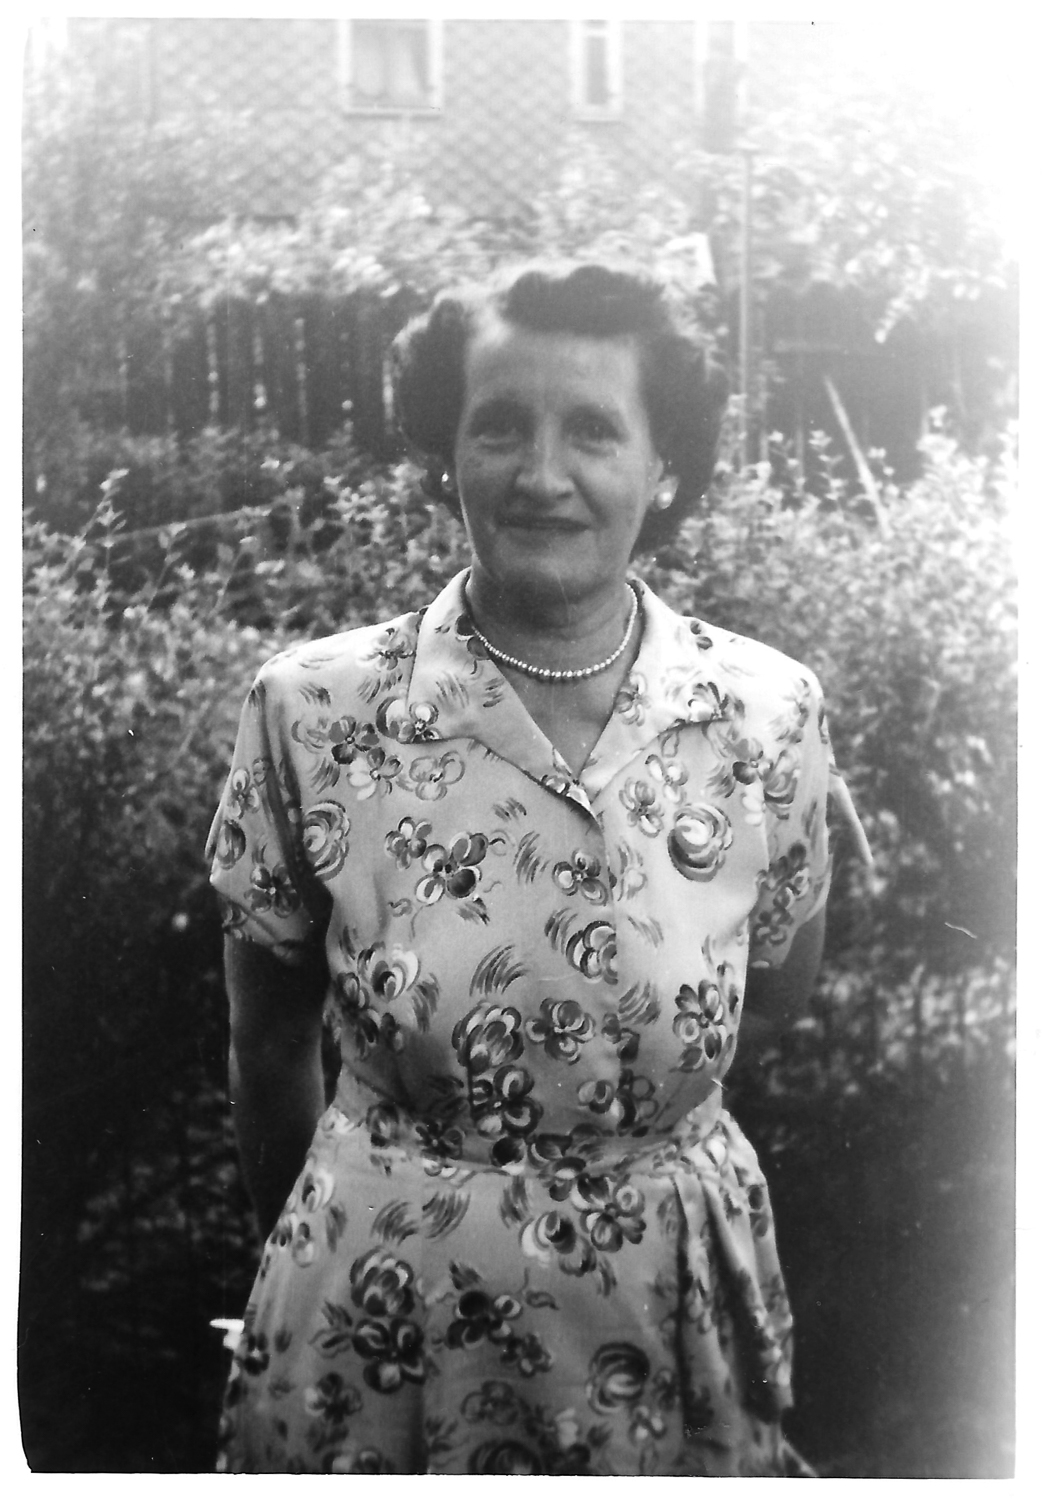 Mom in our backyard, around 1950